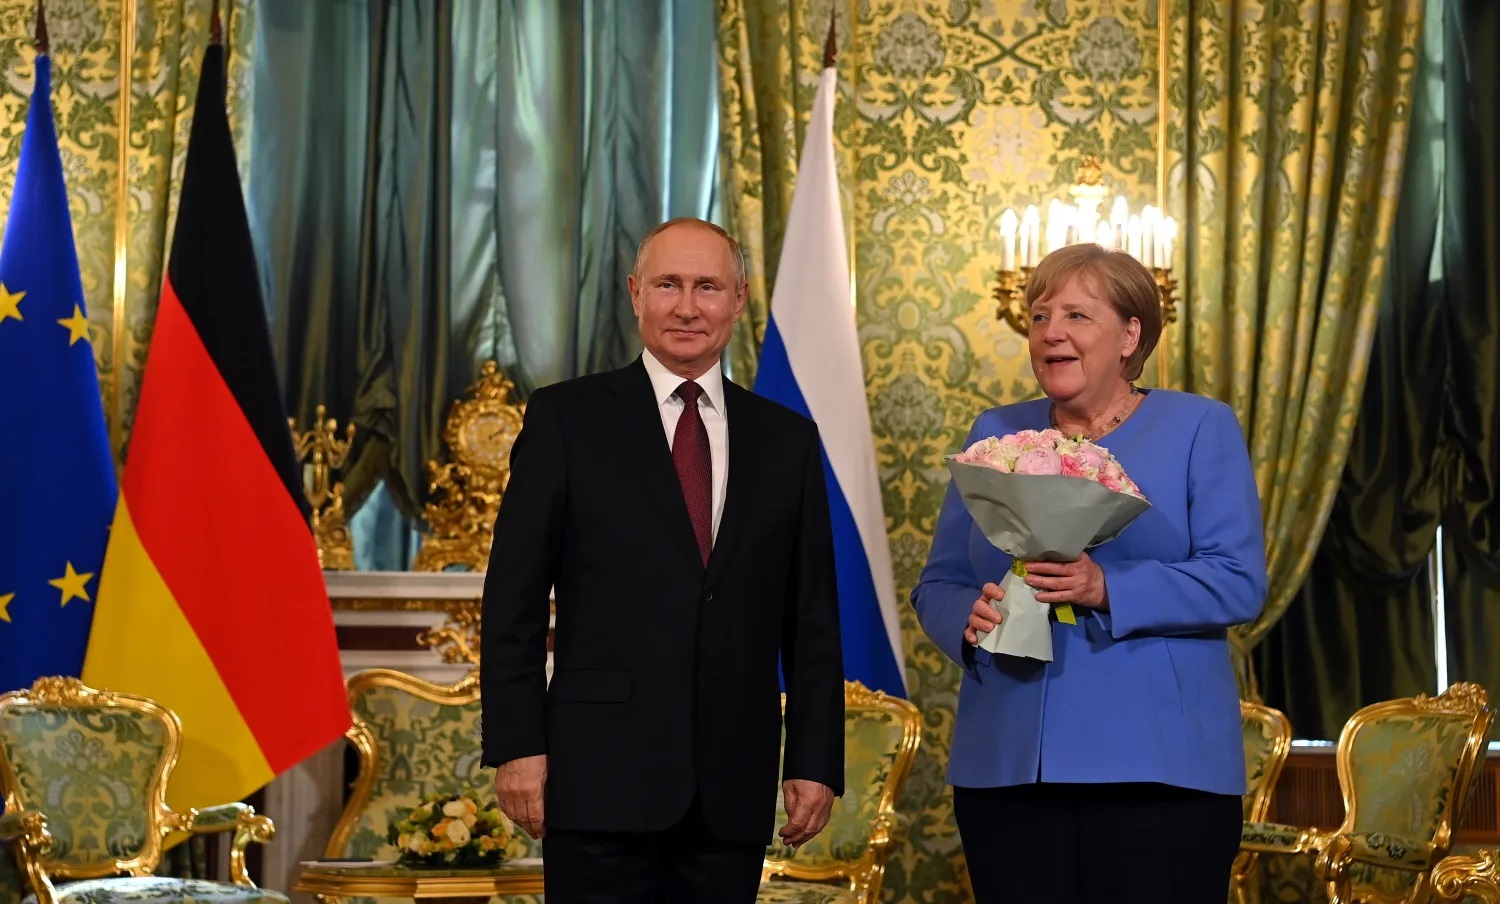 20 Aug. 2021; Merkel’s lack of regrets illustrates the fallacies of Germany’s Russia policy.